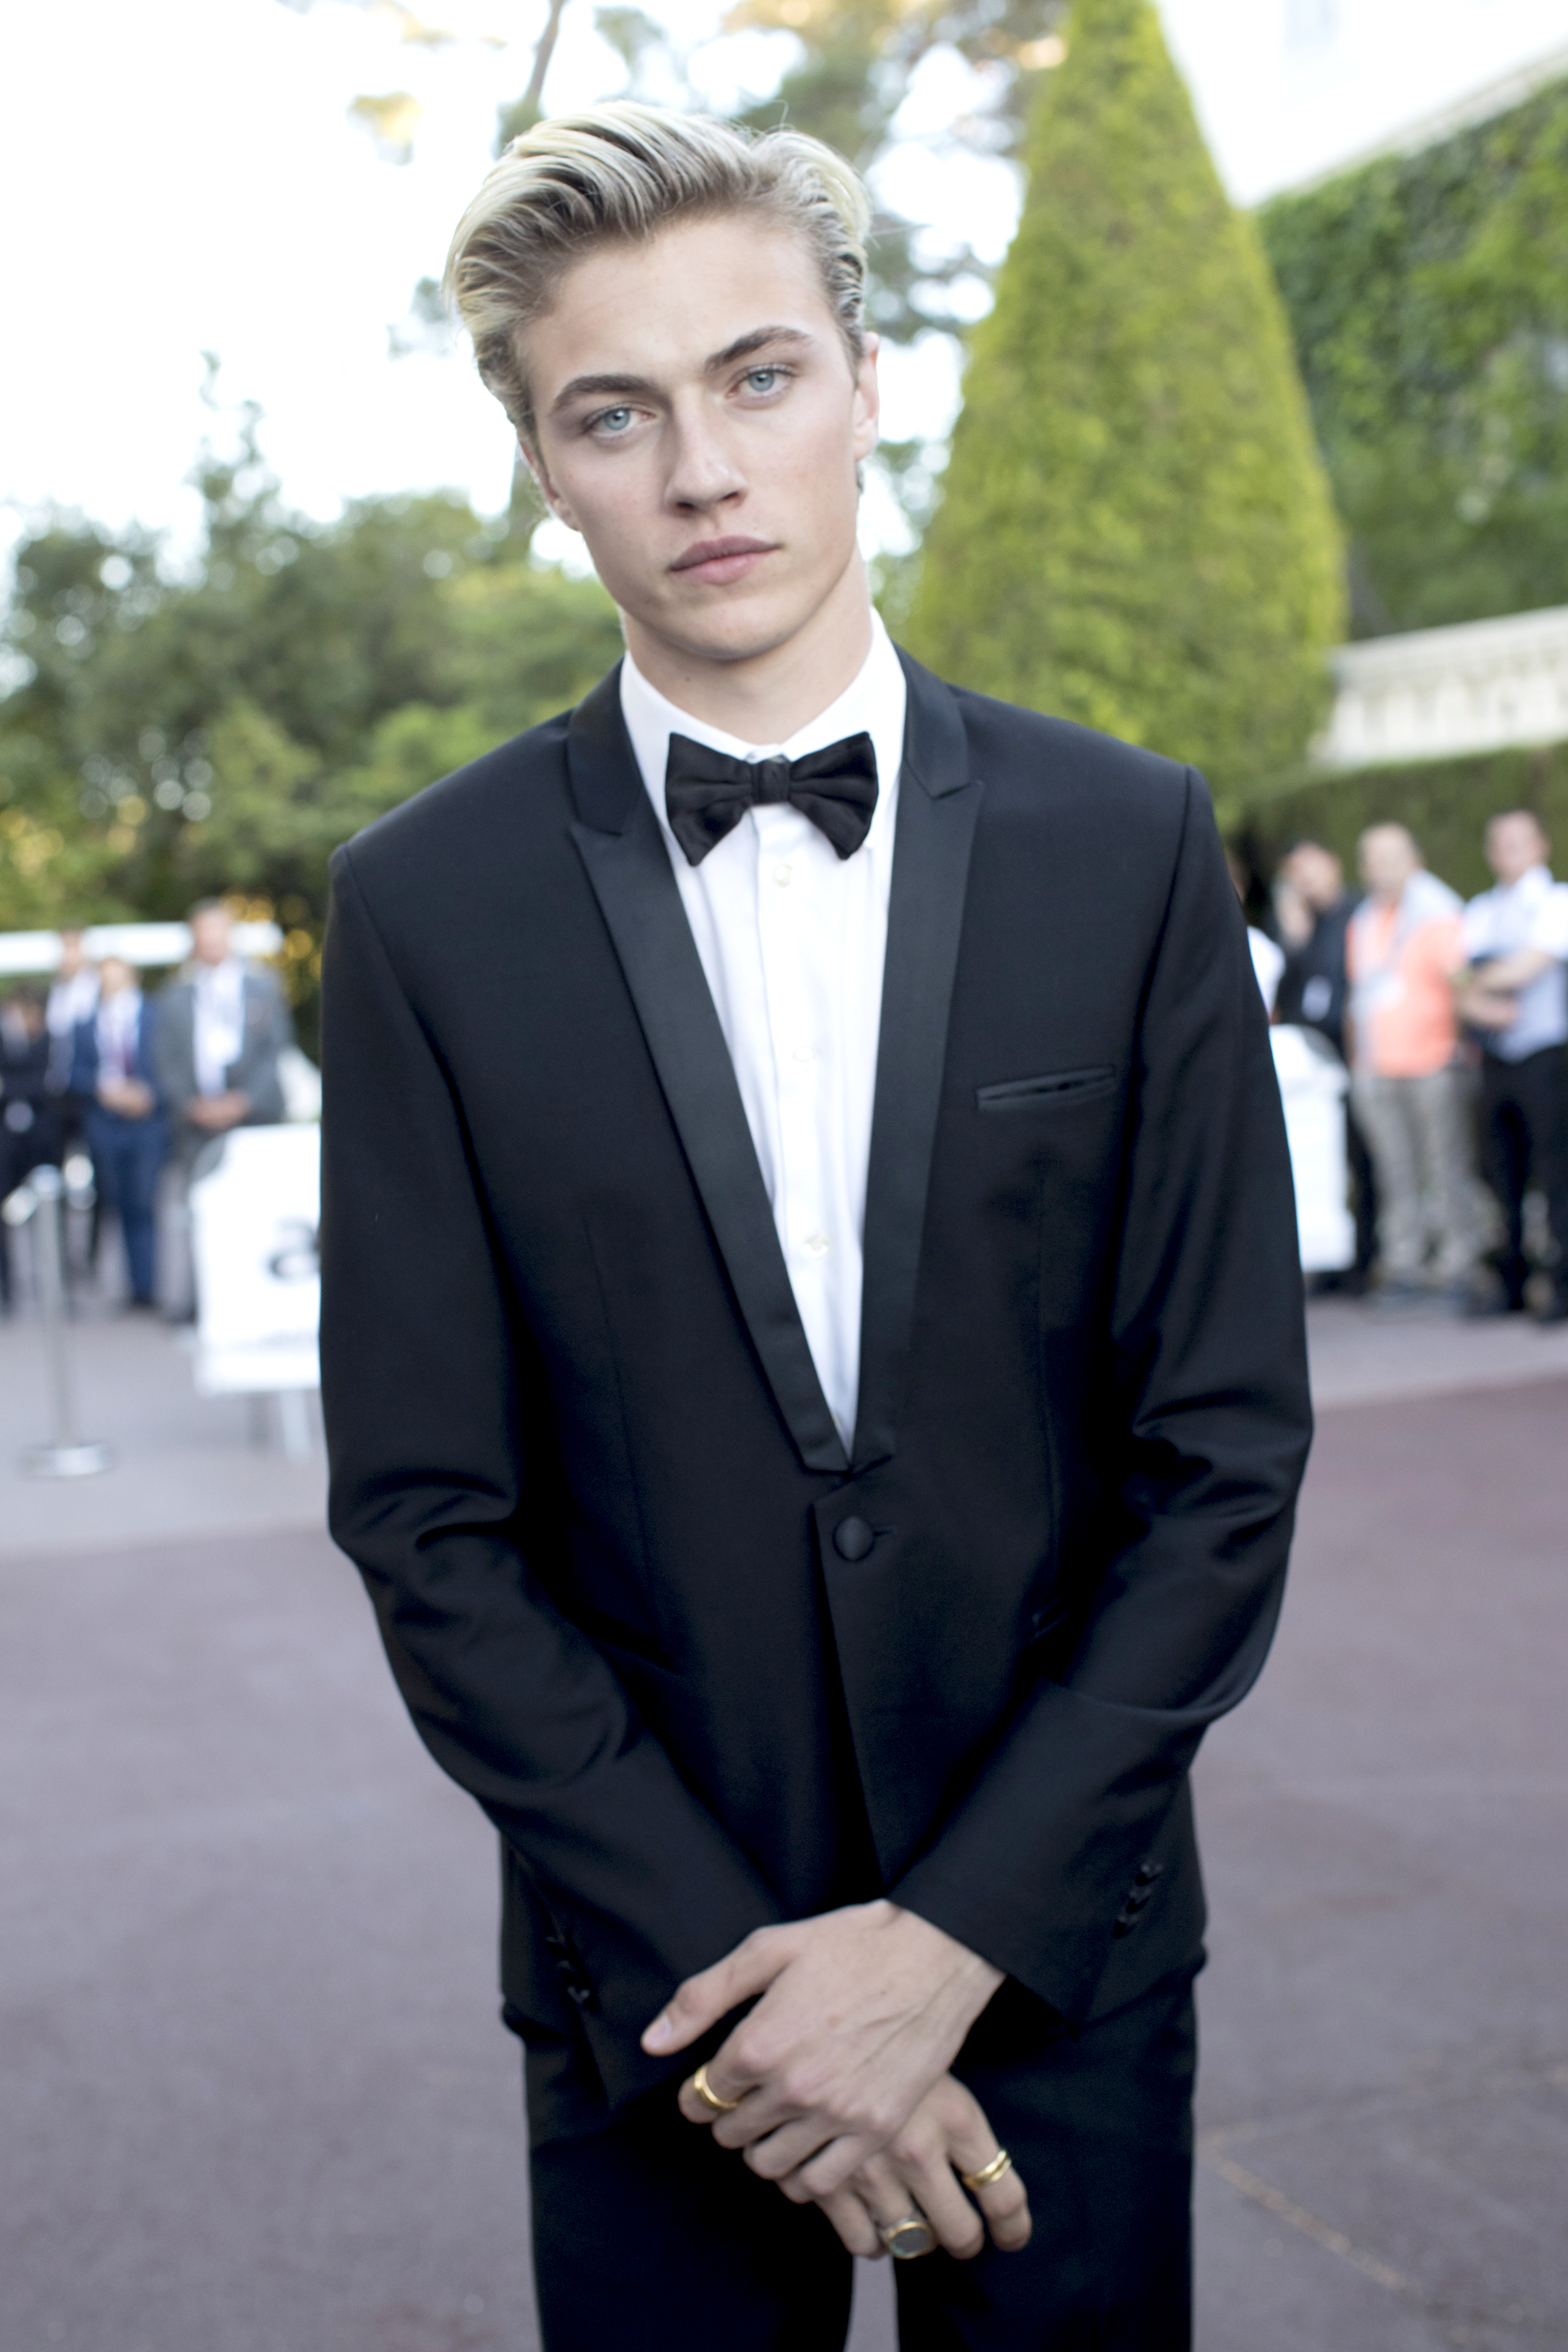 CAP D'ANTIBES, FRANCE - MAY 19:  Lucky Blue Smith attends the amfAR's 23rd Cinema Against AIDS Gala at Hotel du Cap-Eden-Roc on May 19, 2016 in Cap d'Antibes, France.  (Photo by Kevin Tachman/WireImage)